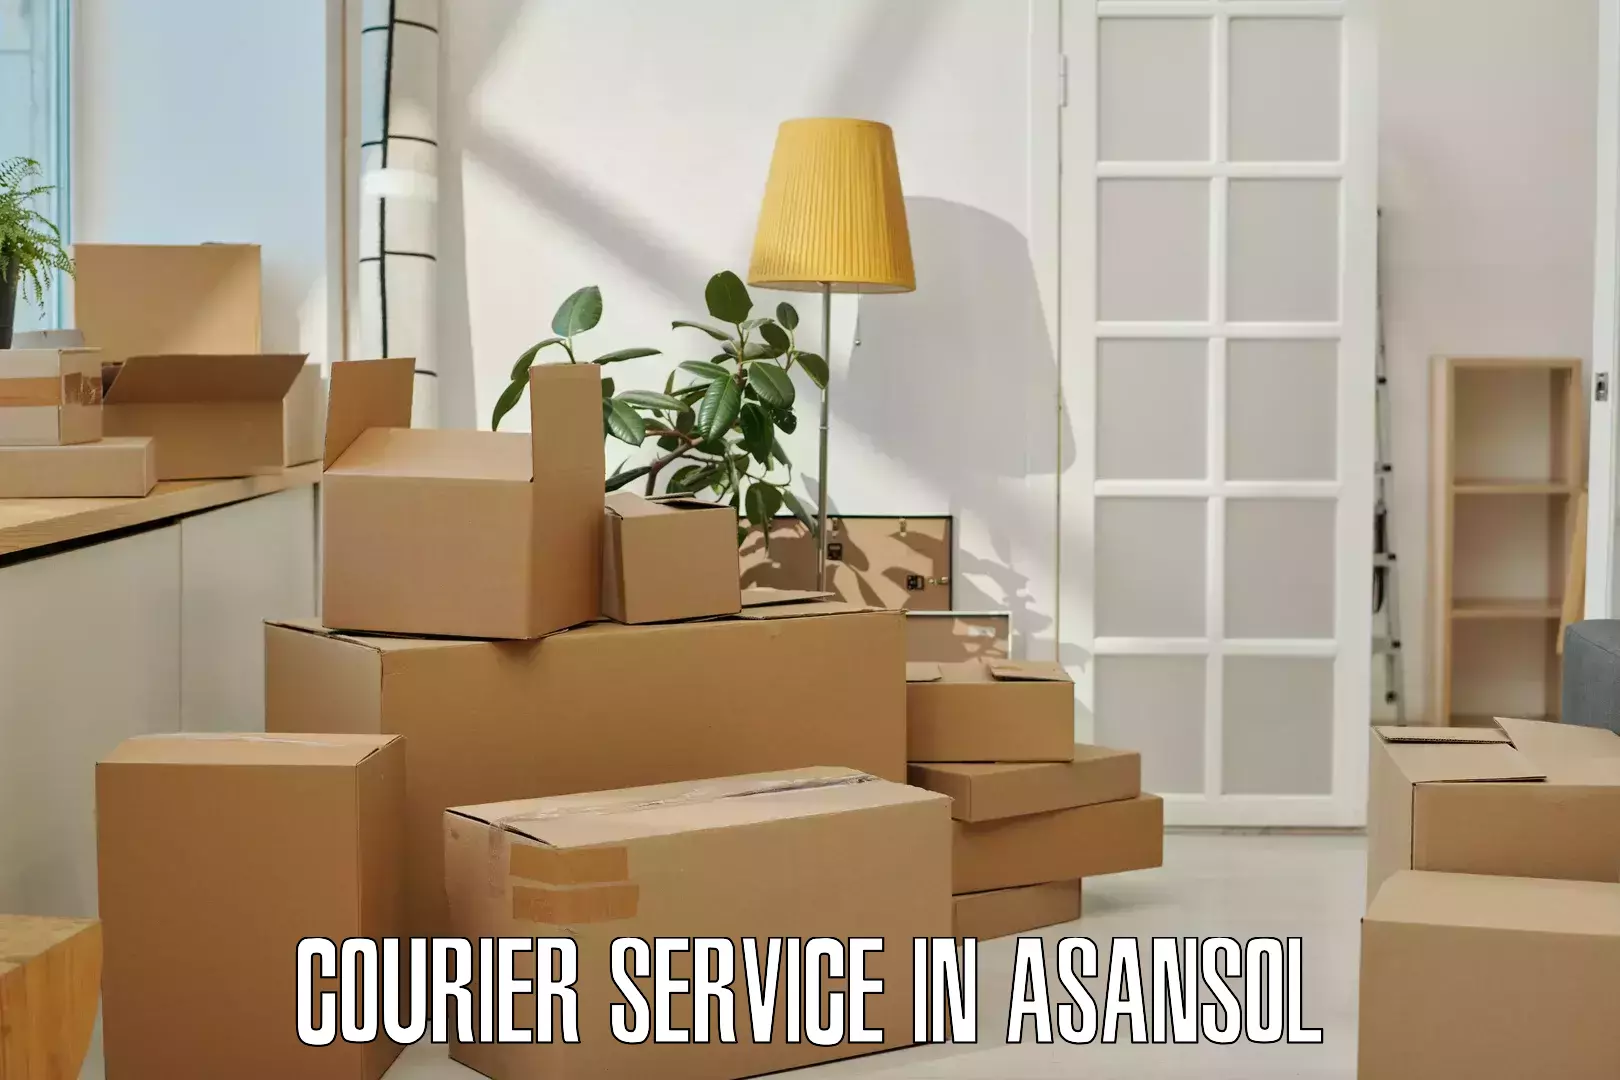 Parcel service for businesses in Asansol